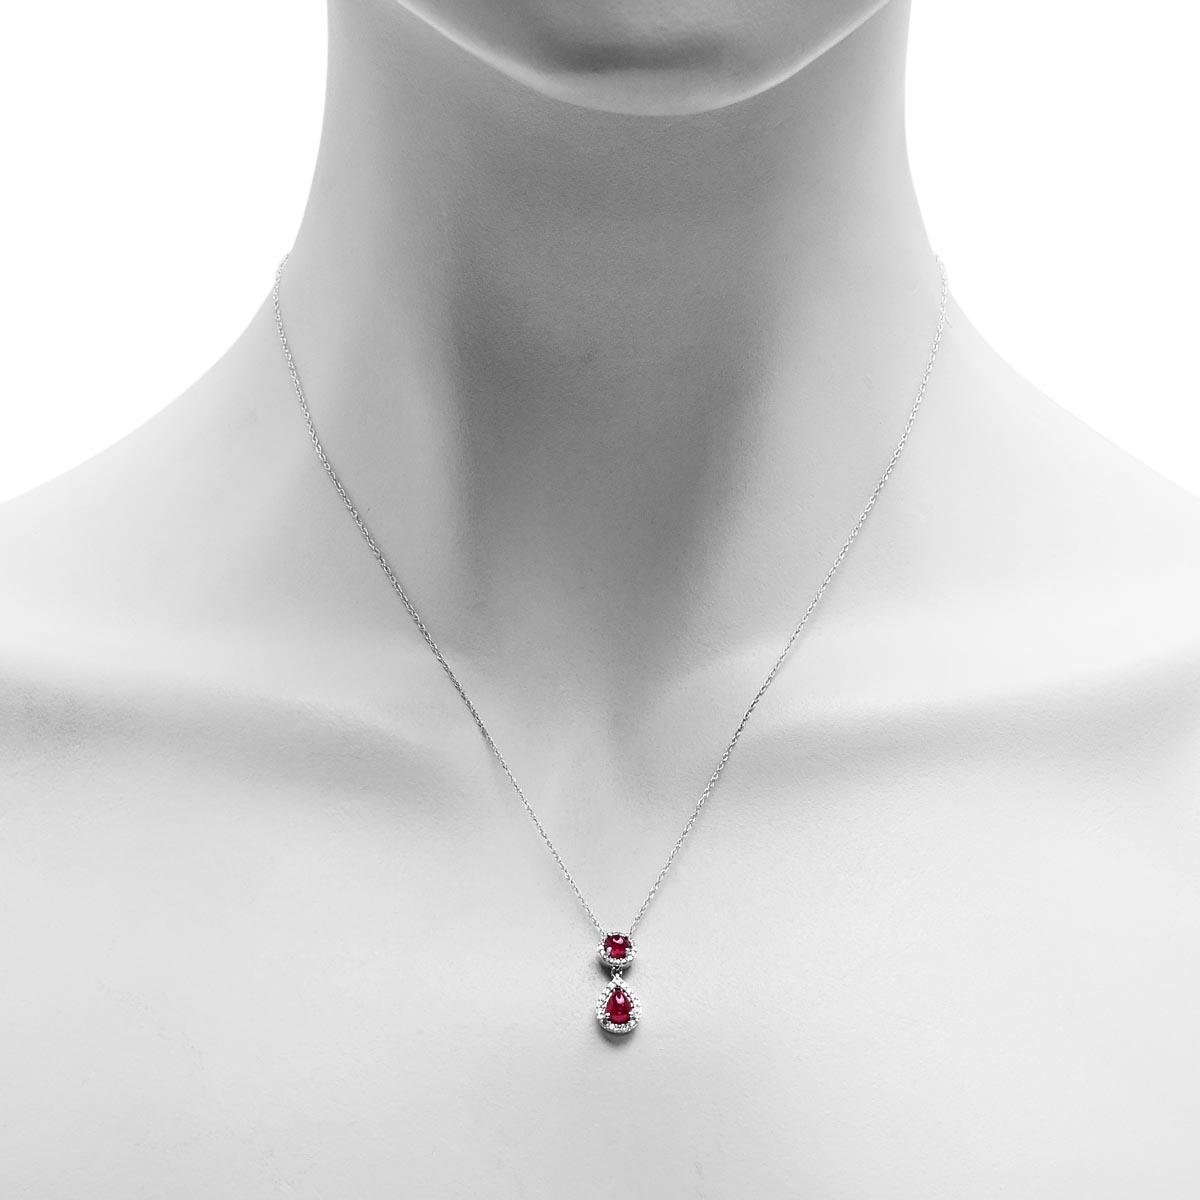 Greenland Ruby Necklace in 10kt White Gold with Diamonds (1/7ct tw)